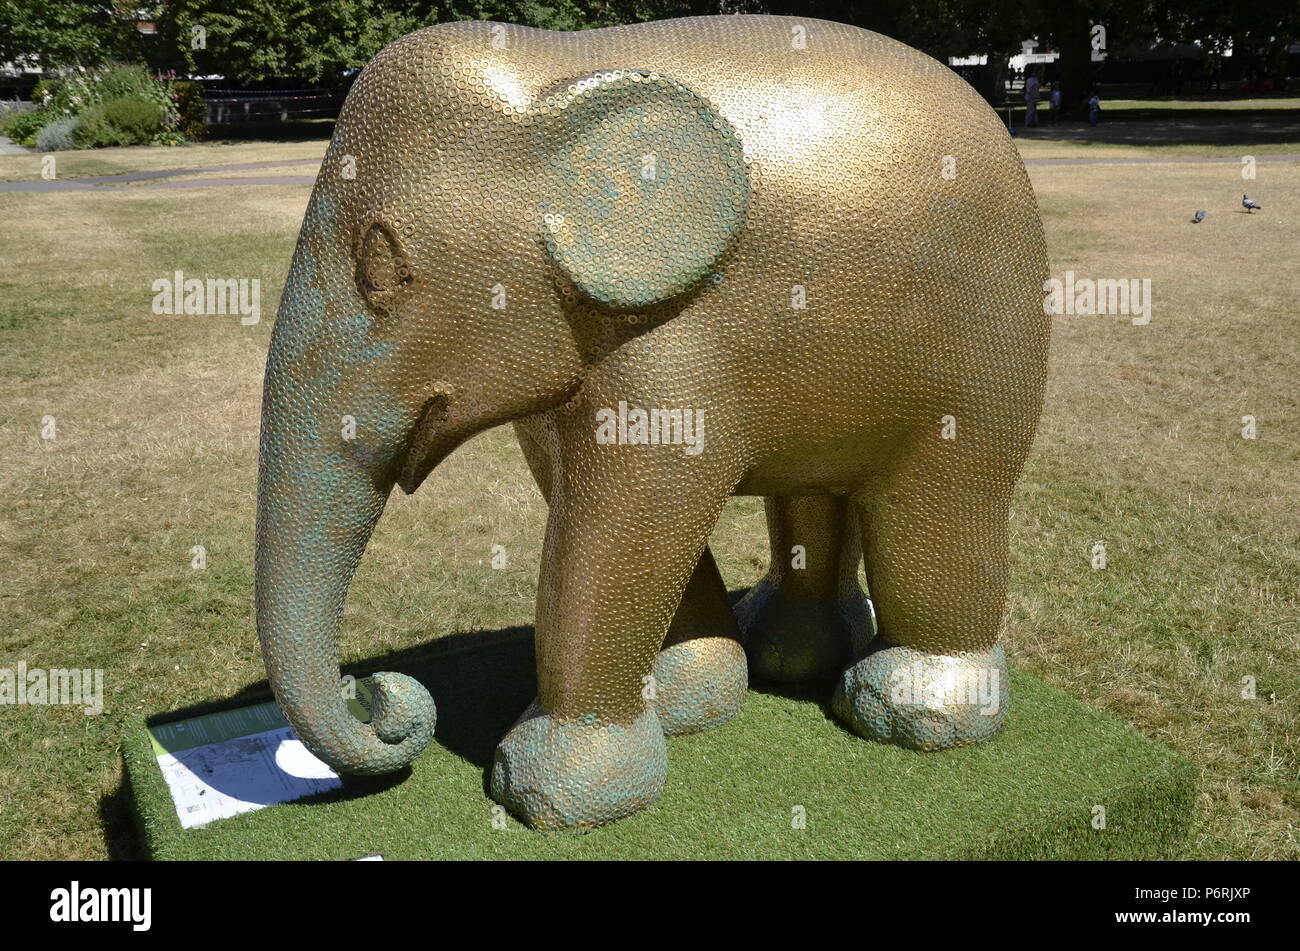 An elephant sculpture in Grosvenor Square, Mayfair London as part of the 2018 Elephant parade to highlight the plight of Asian elephants Stock Photo